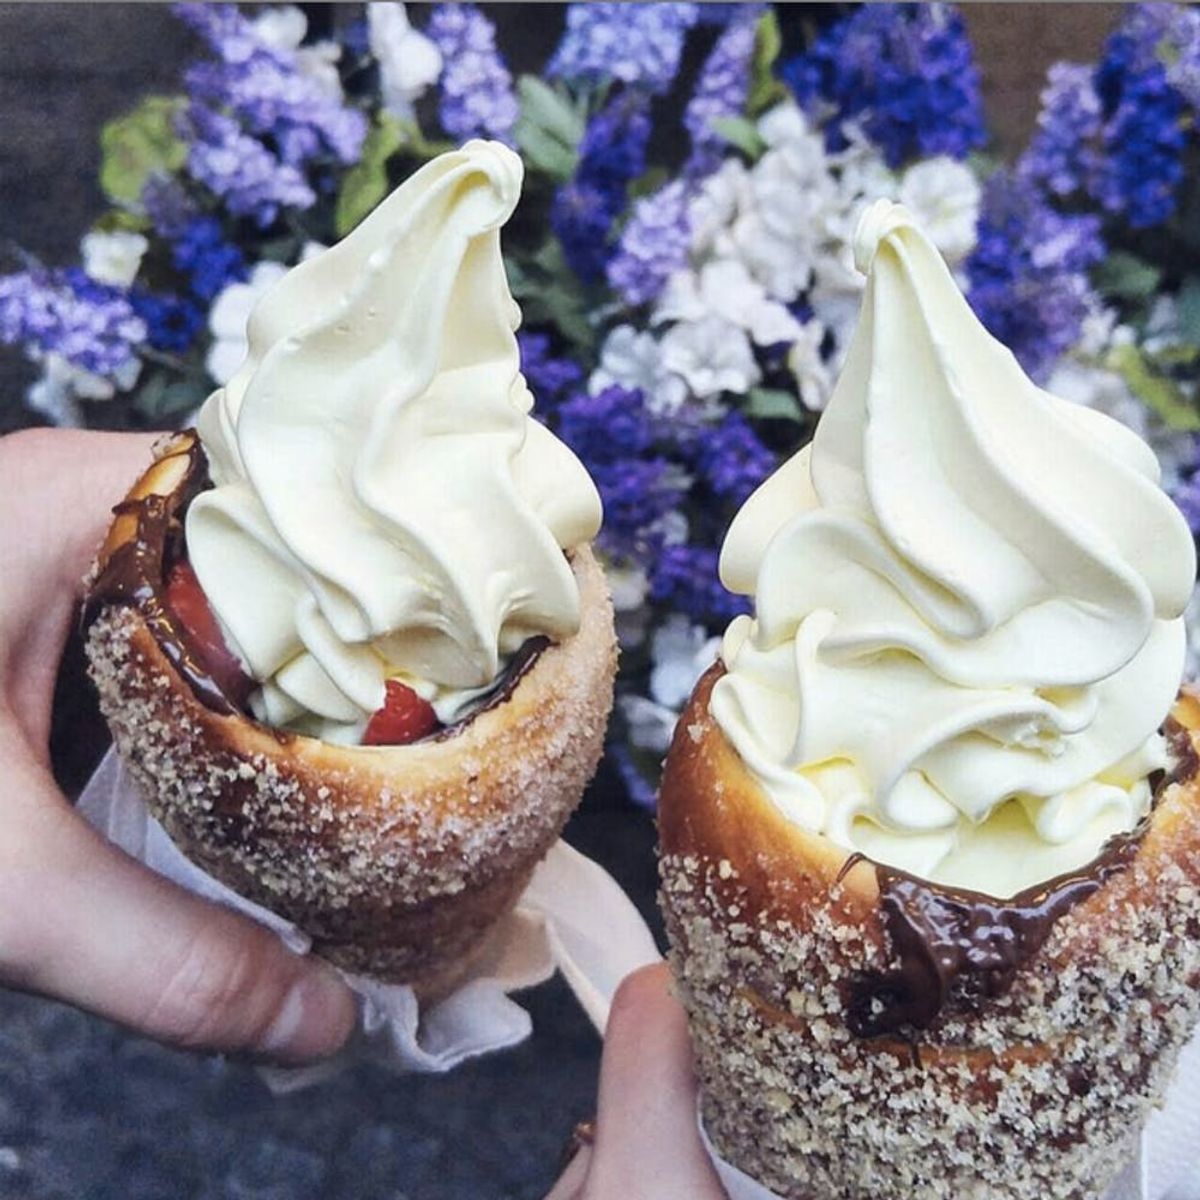 The World May Have Just Hit Peak Dessert With These Donut Ice-Cream Cones